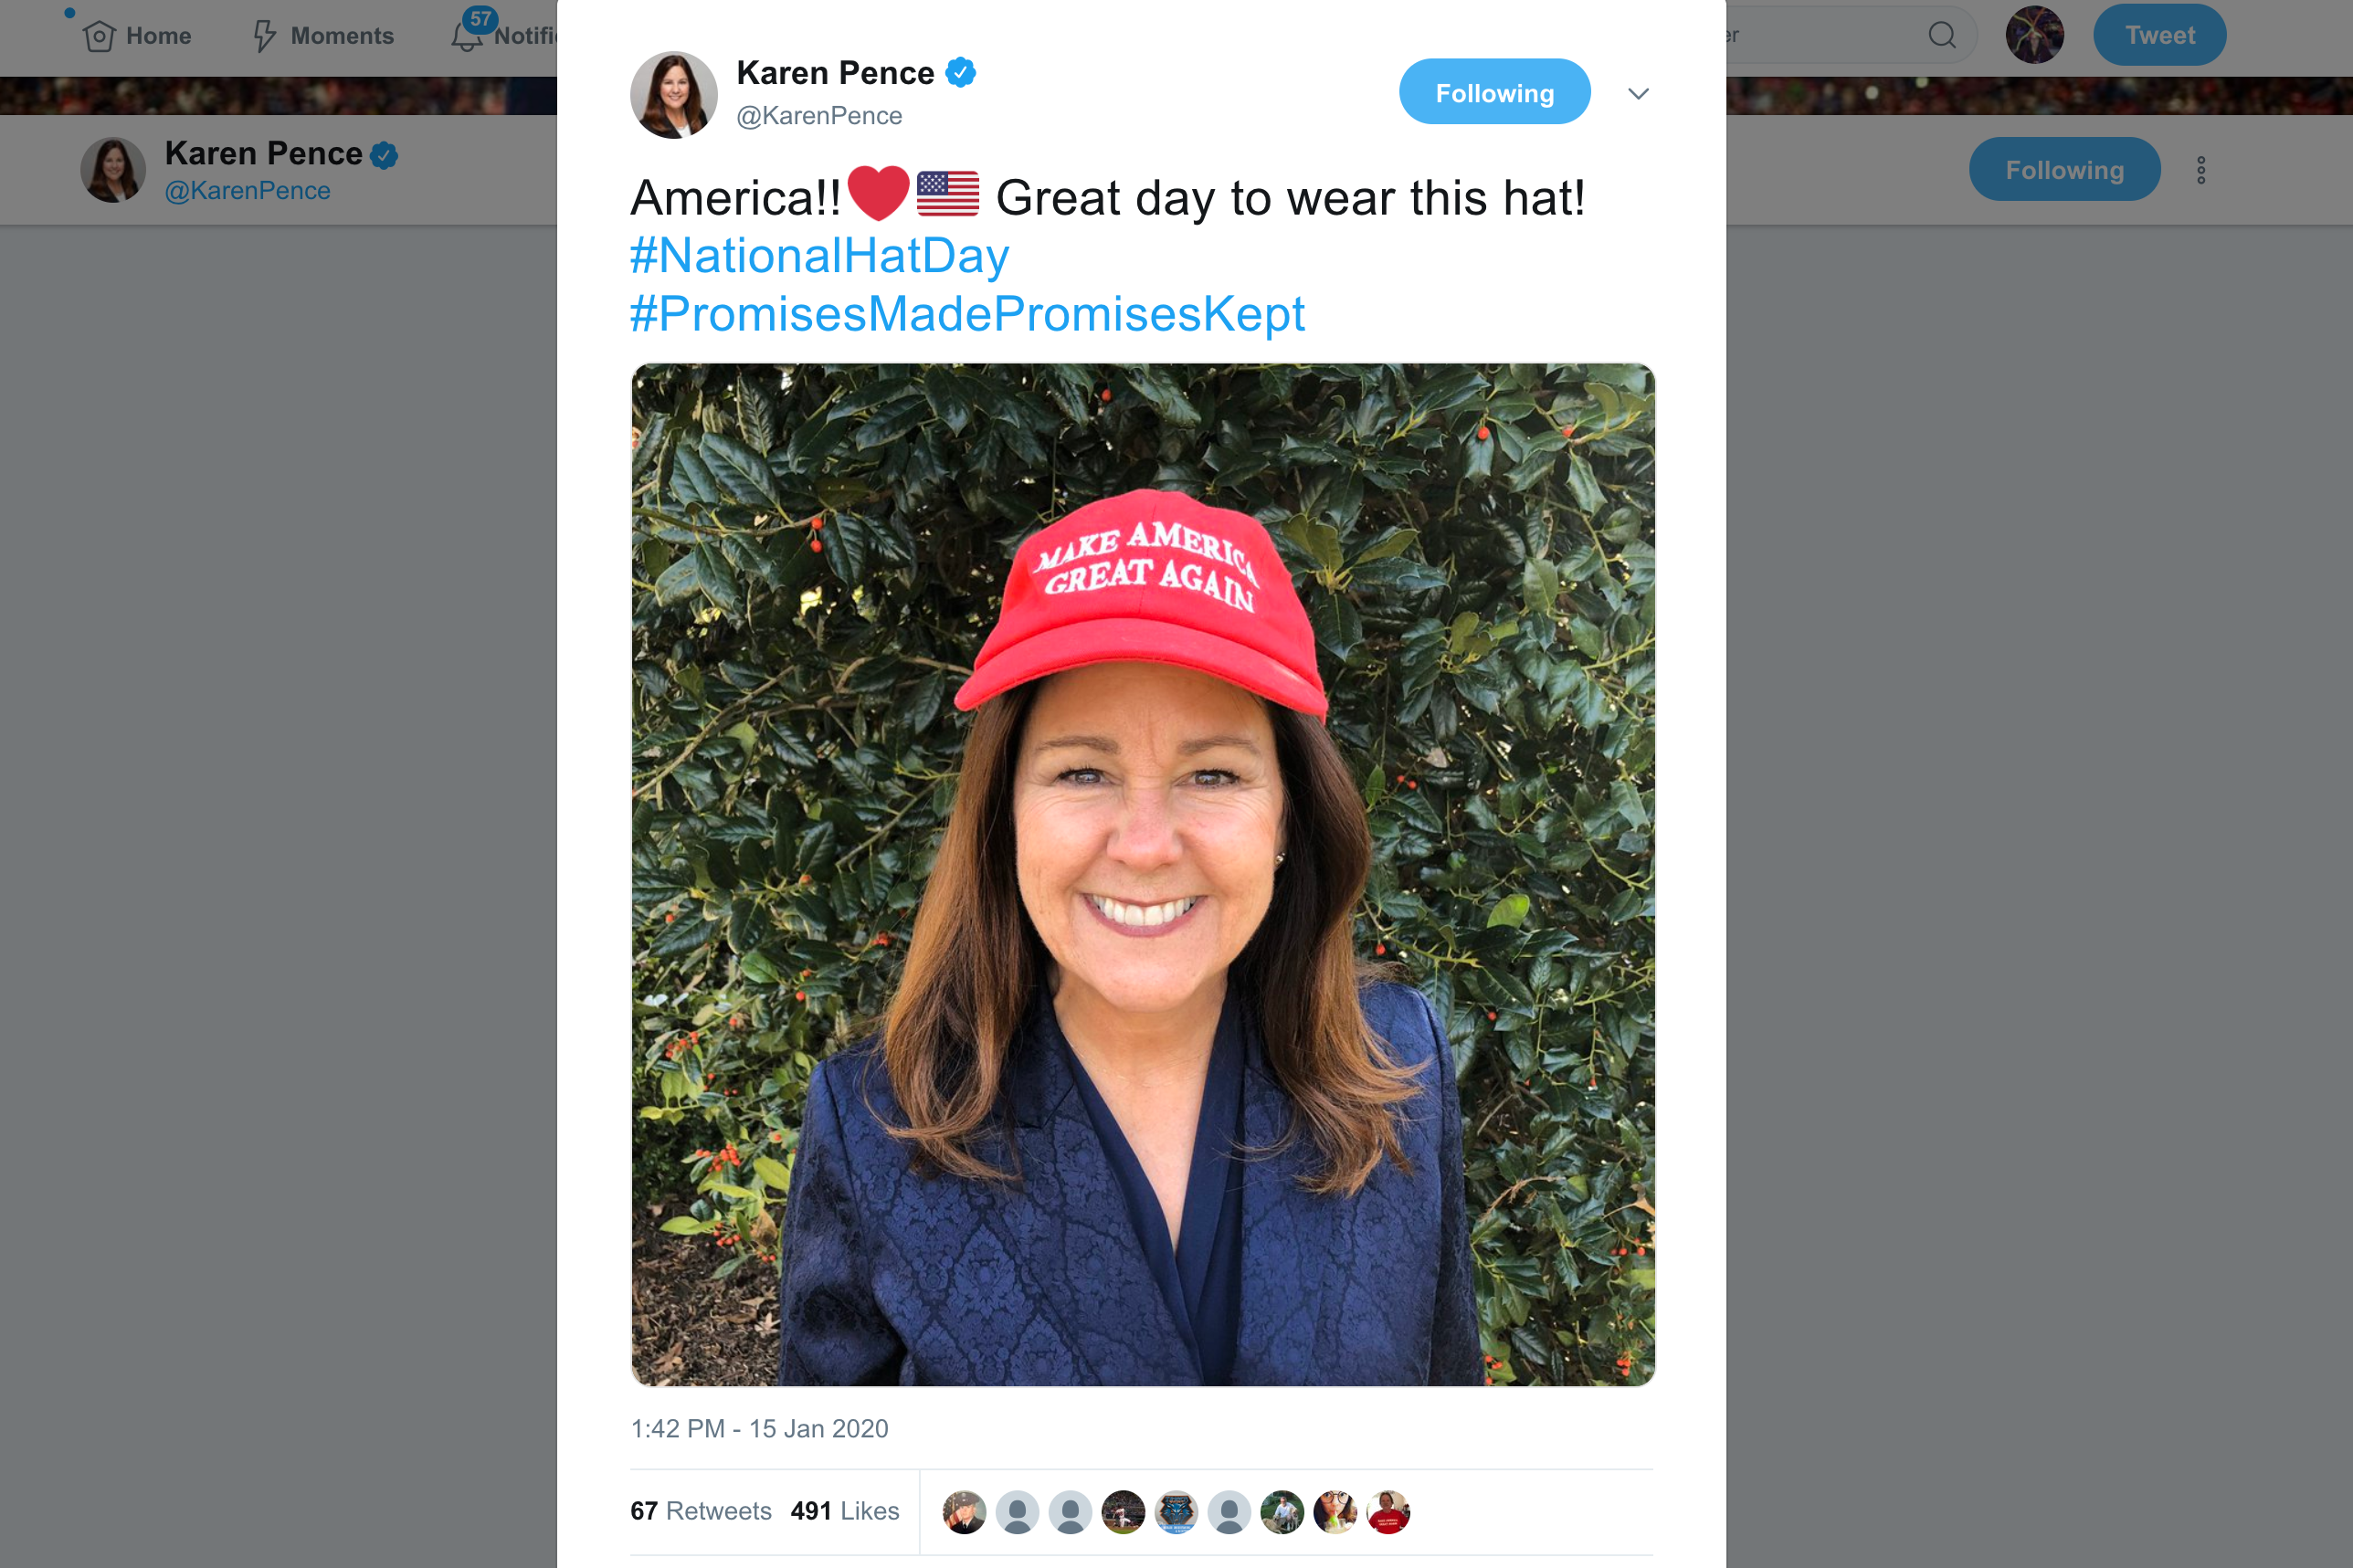 A screenshot of a tweet from Karen Pence, featuring a photo of her wearing a red MAGA hat.